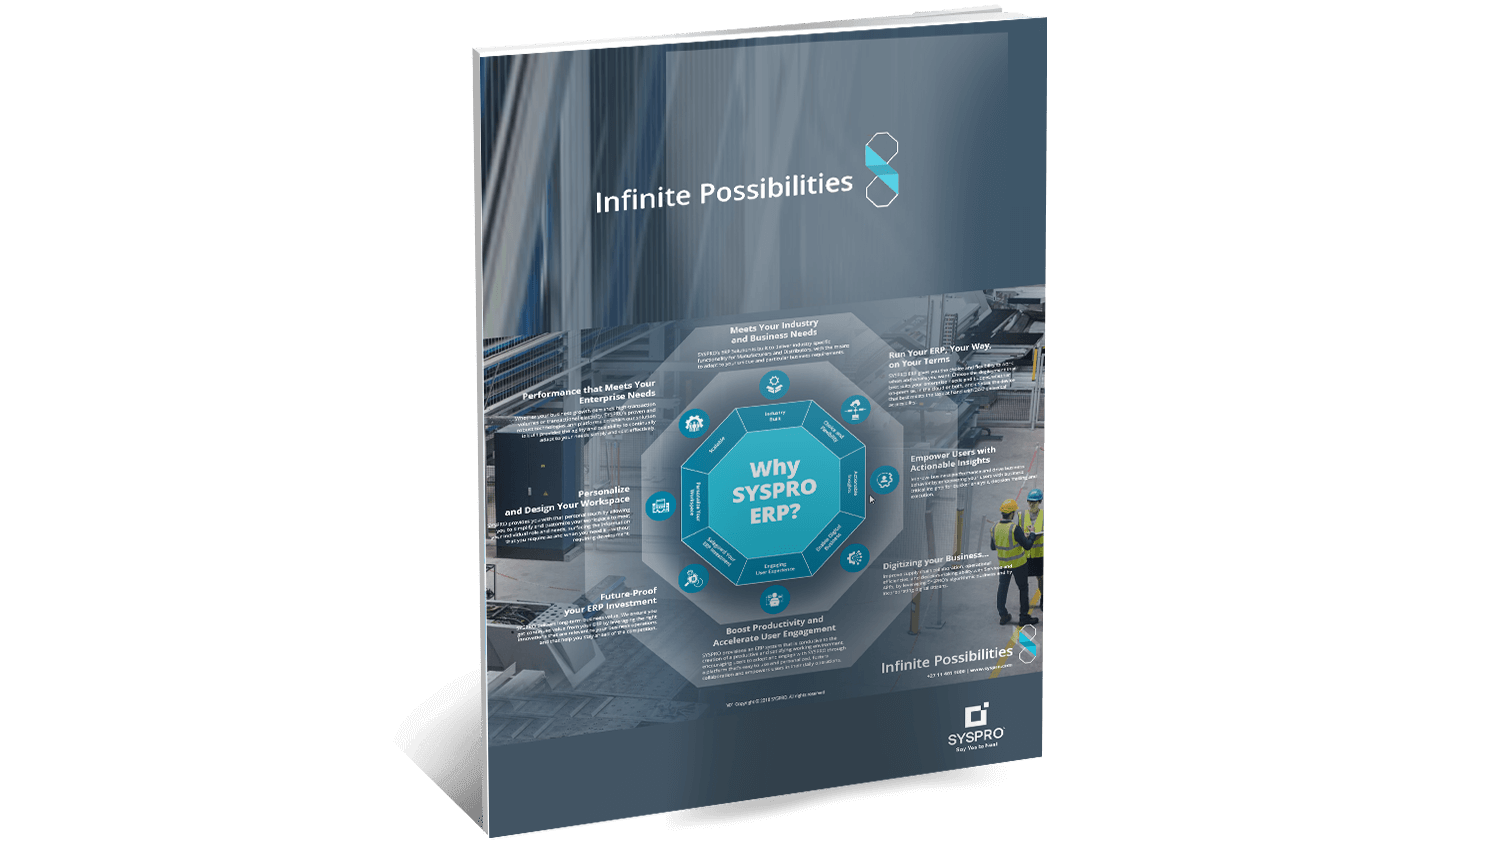 SYSPRO-ERP-software-system-infinite-possibilities-infographic